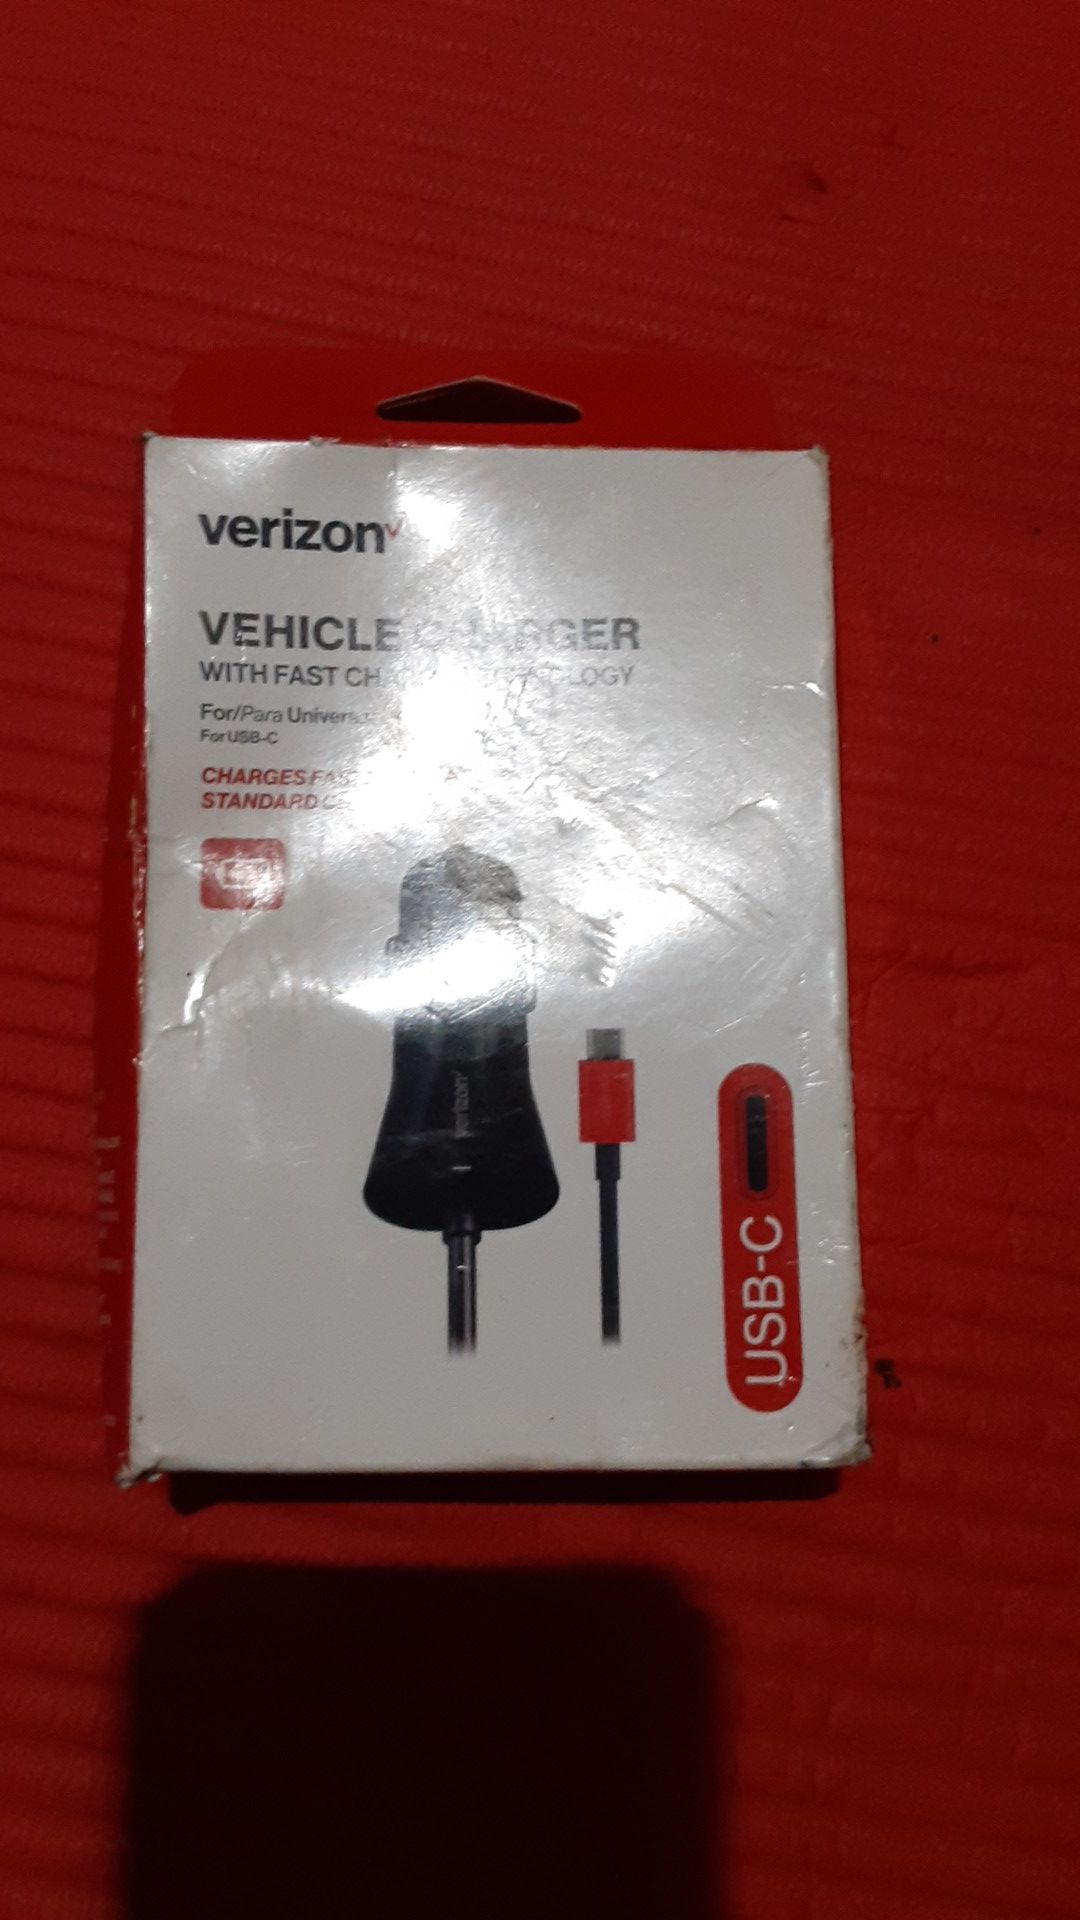 Verizon vehicle charger with fast charge